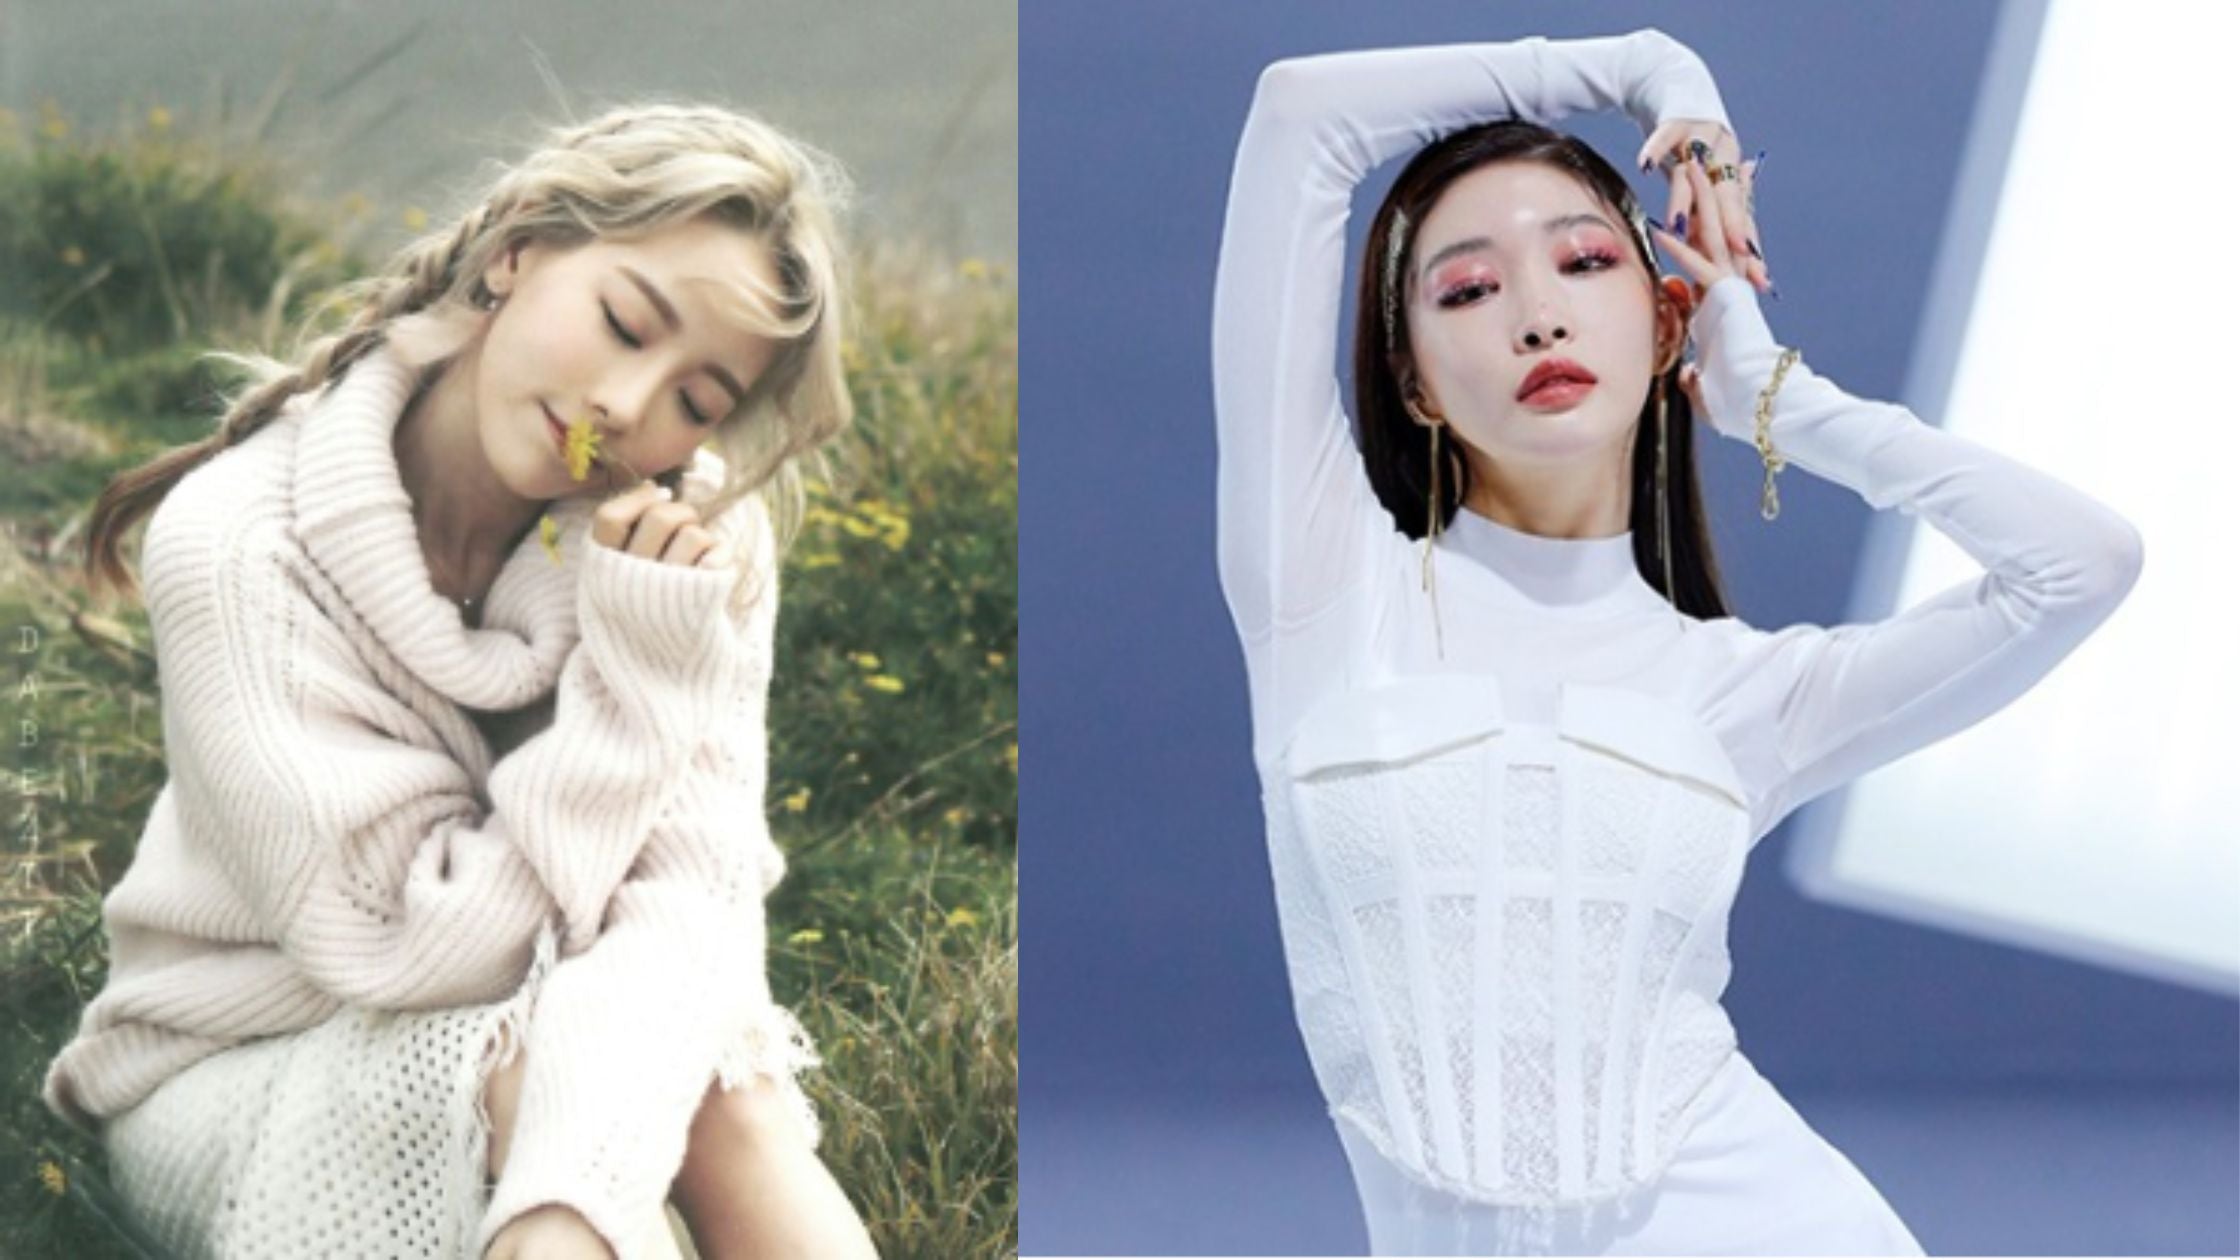 Taeyeon promo for "I" and Chungha promo for "Stay Tonight"